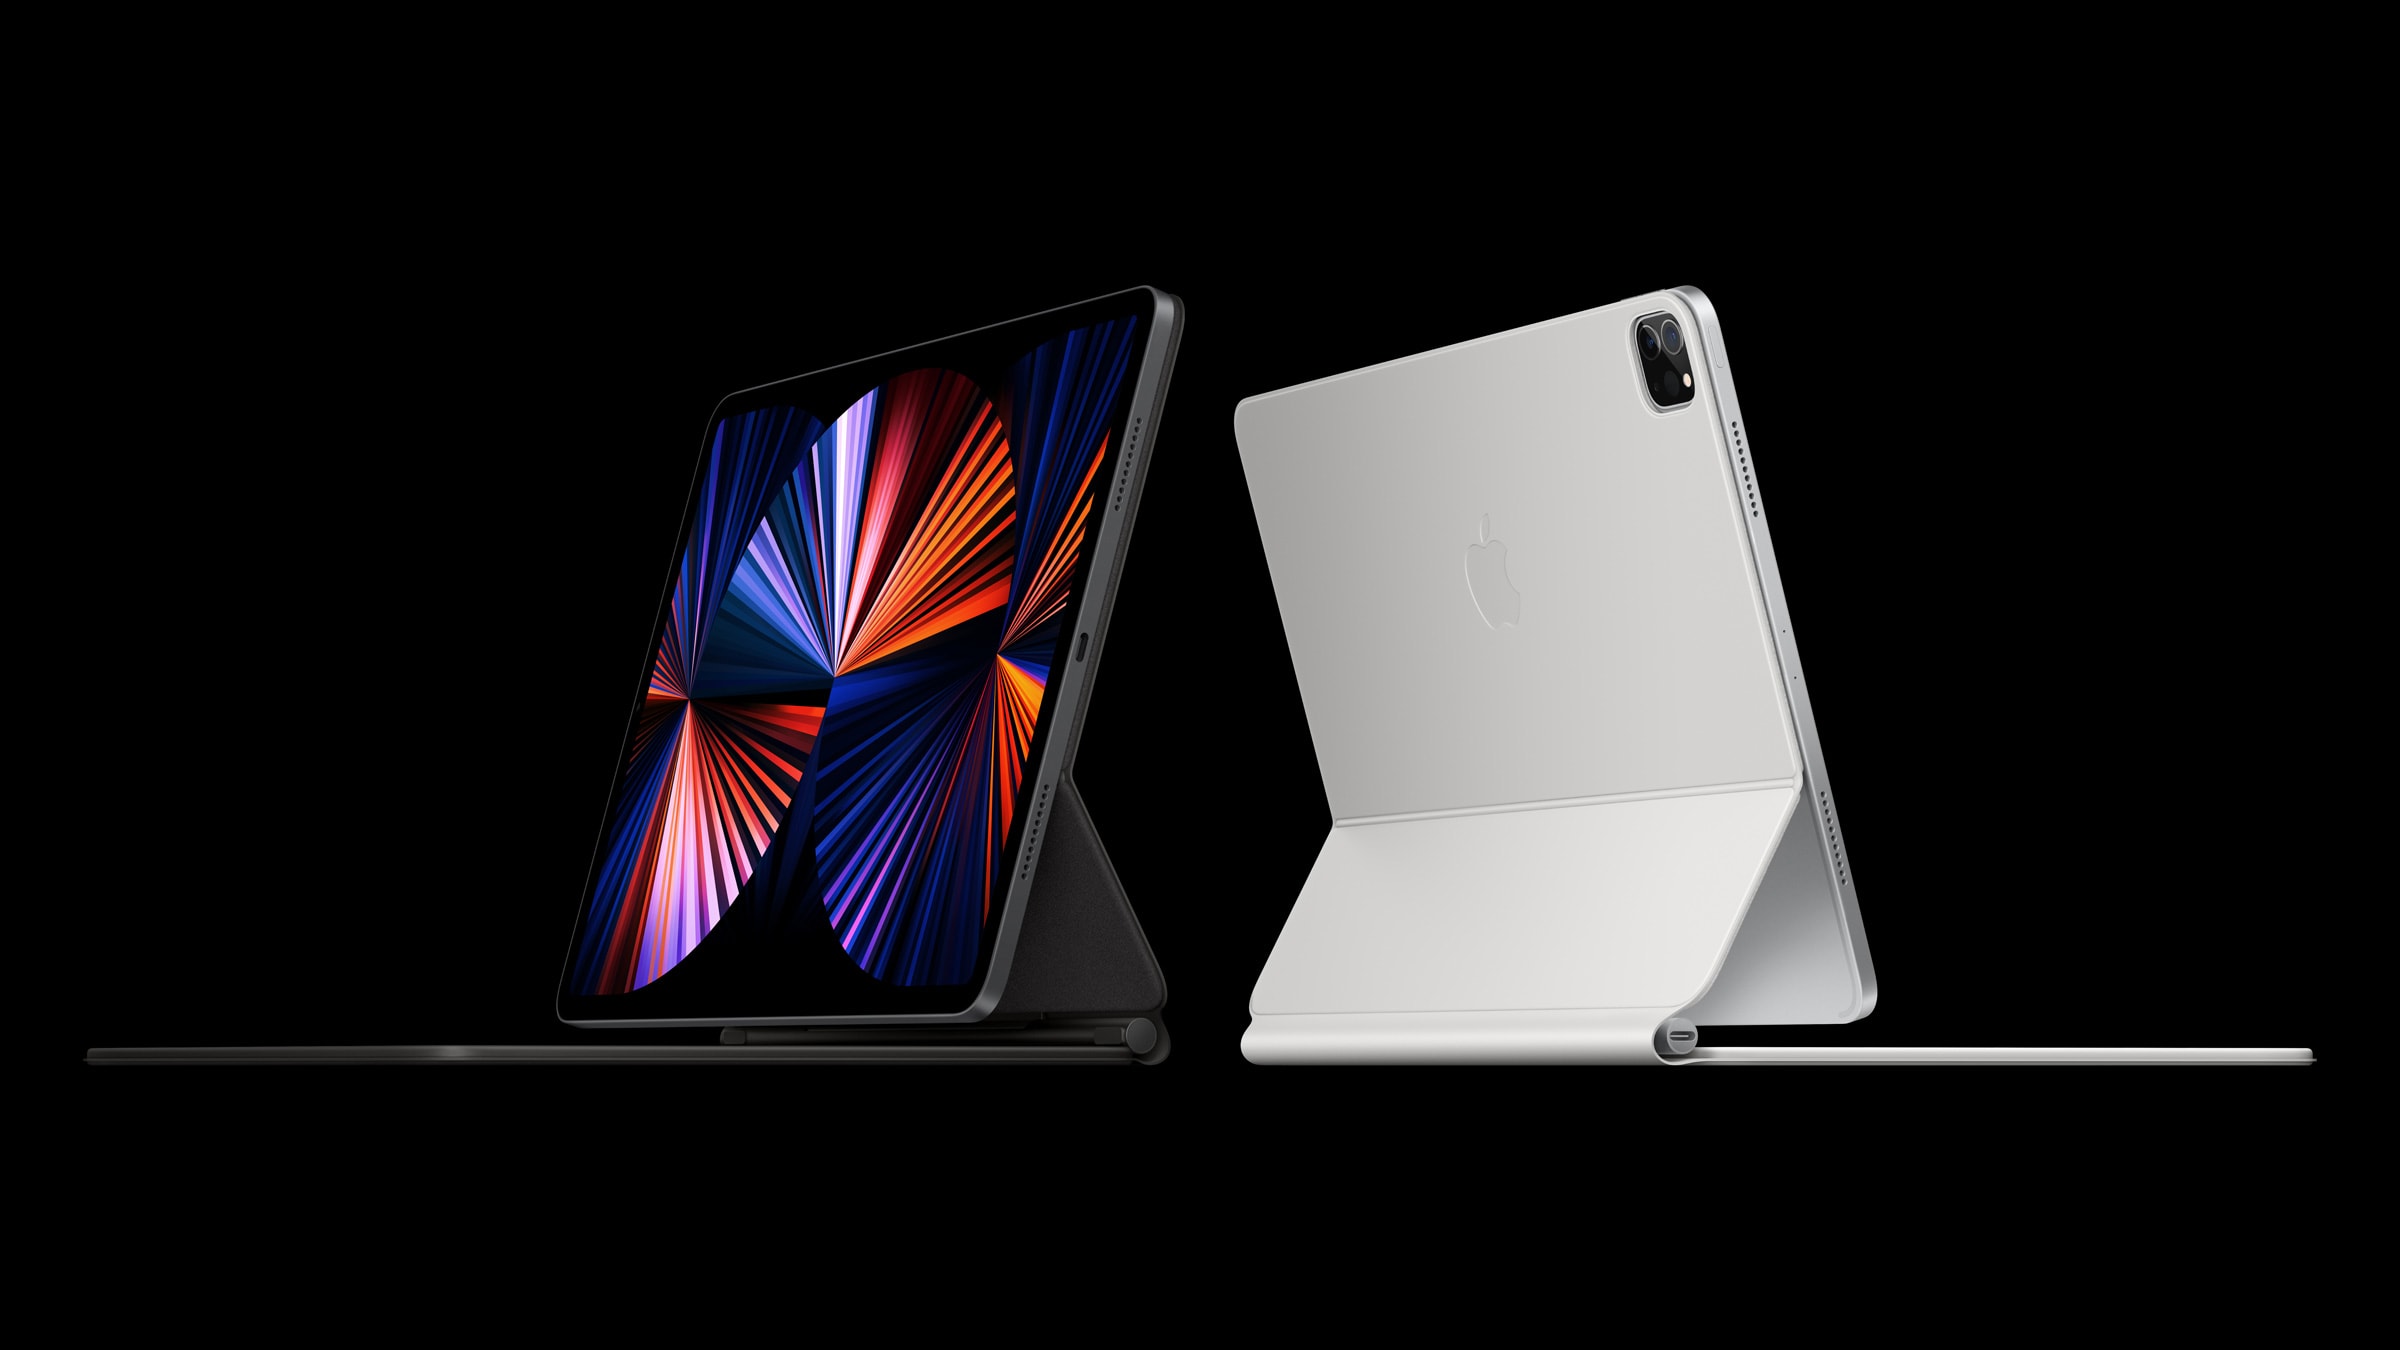 How to preorder a 2021 iPad Pro: The 2021 iPad Pro also comes with a new Magic Keyboard